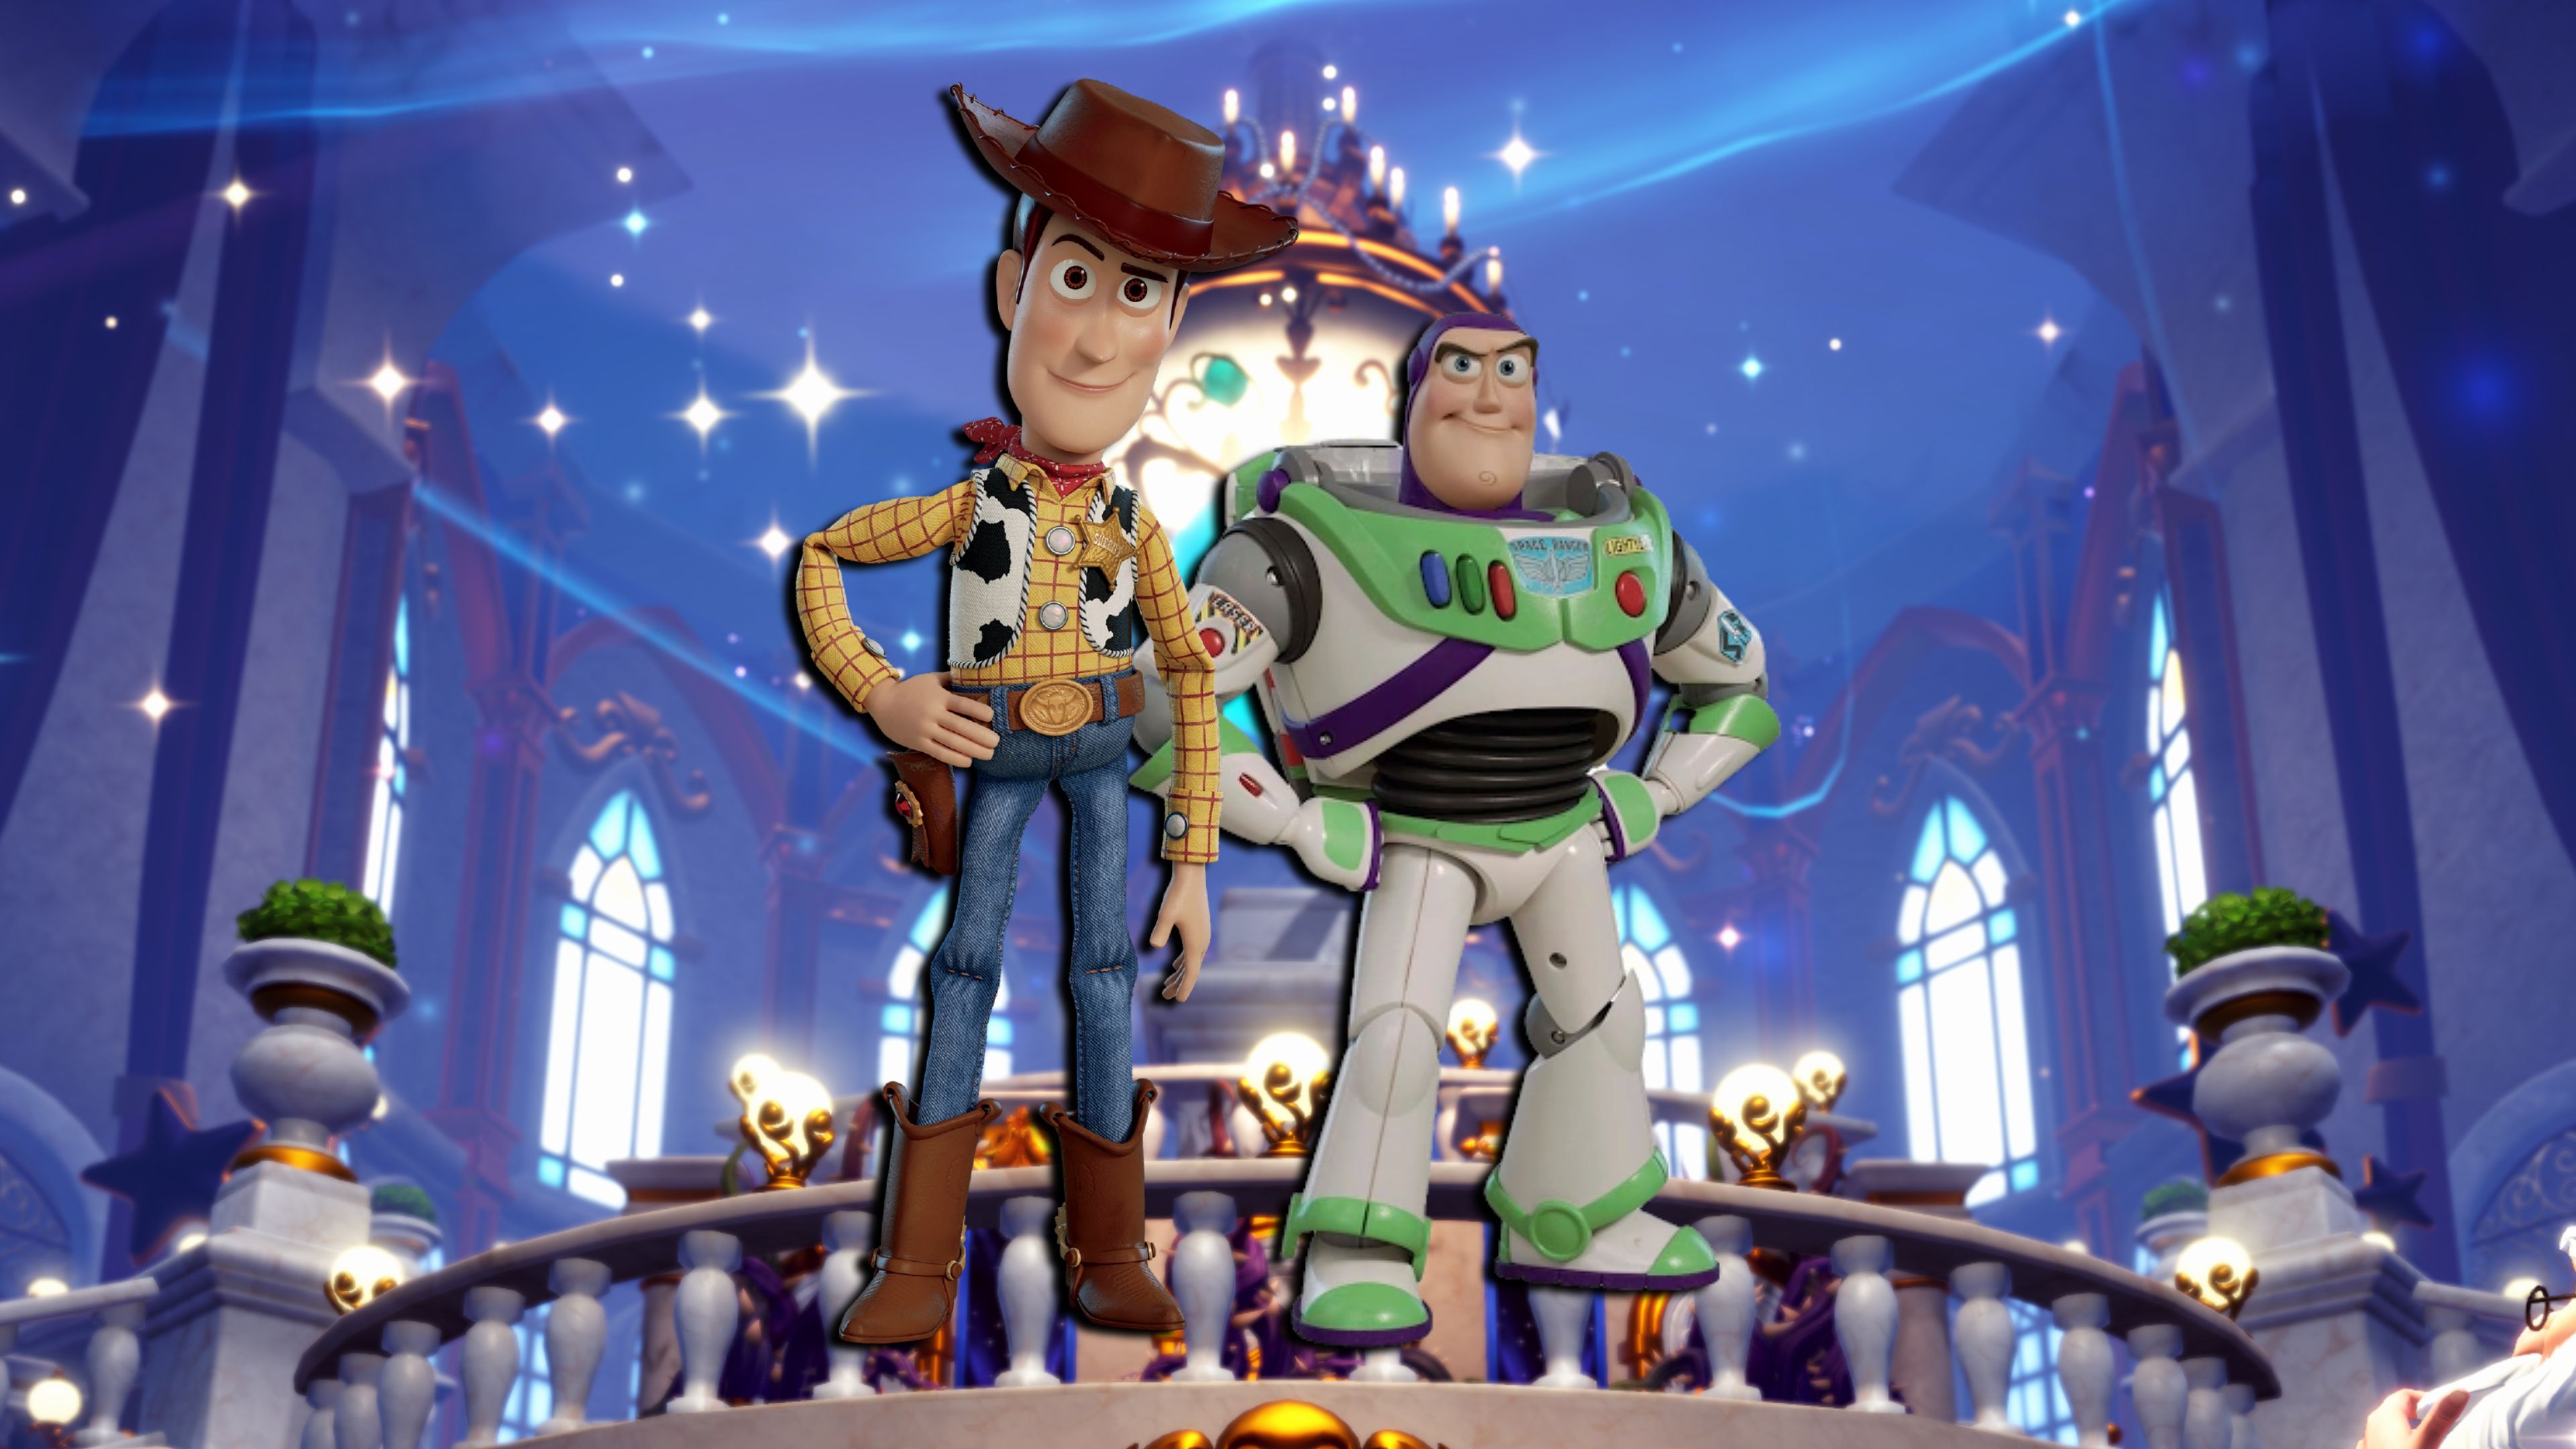 Buzz and Woody, Disney Dreamlight Valley's newest characters, in the game's castle lobby.